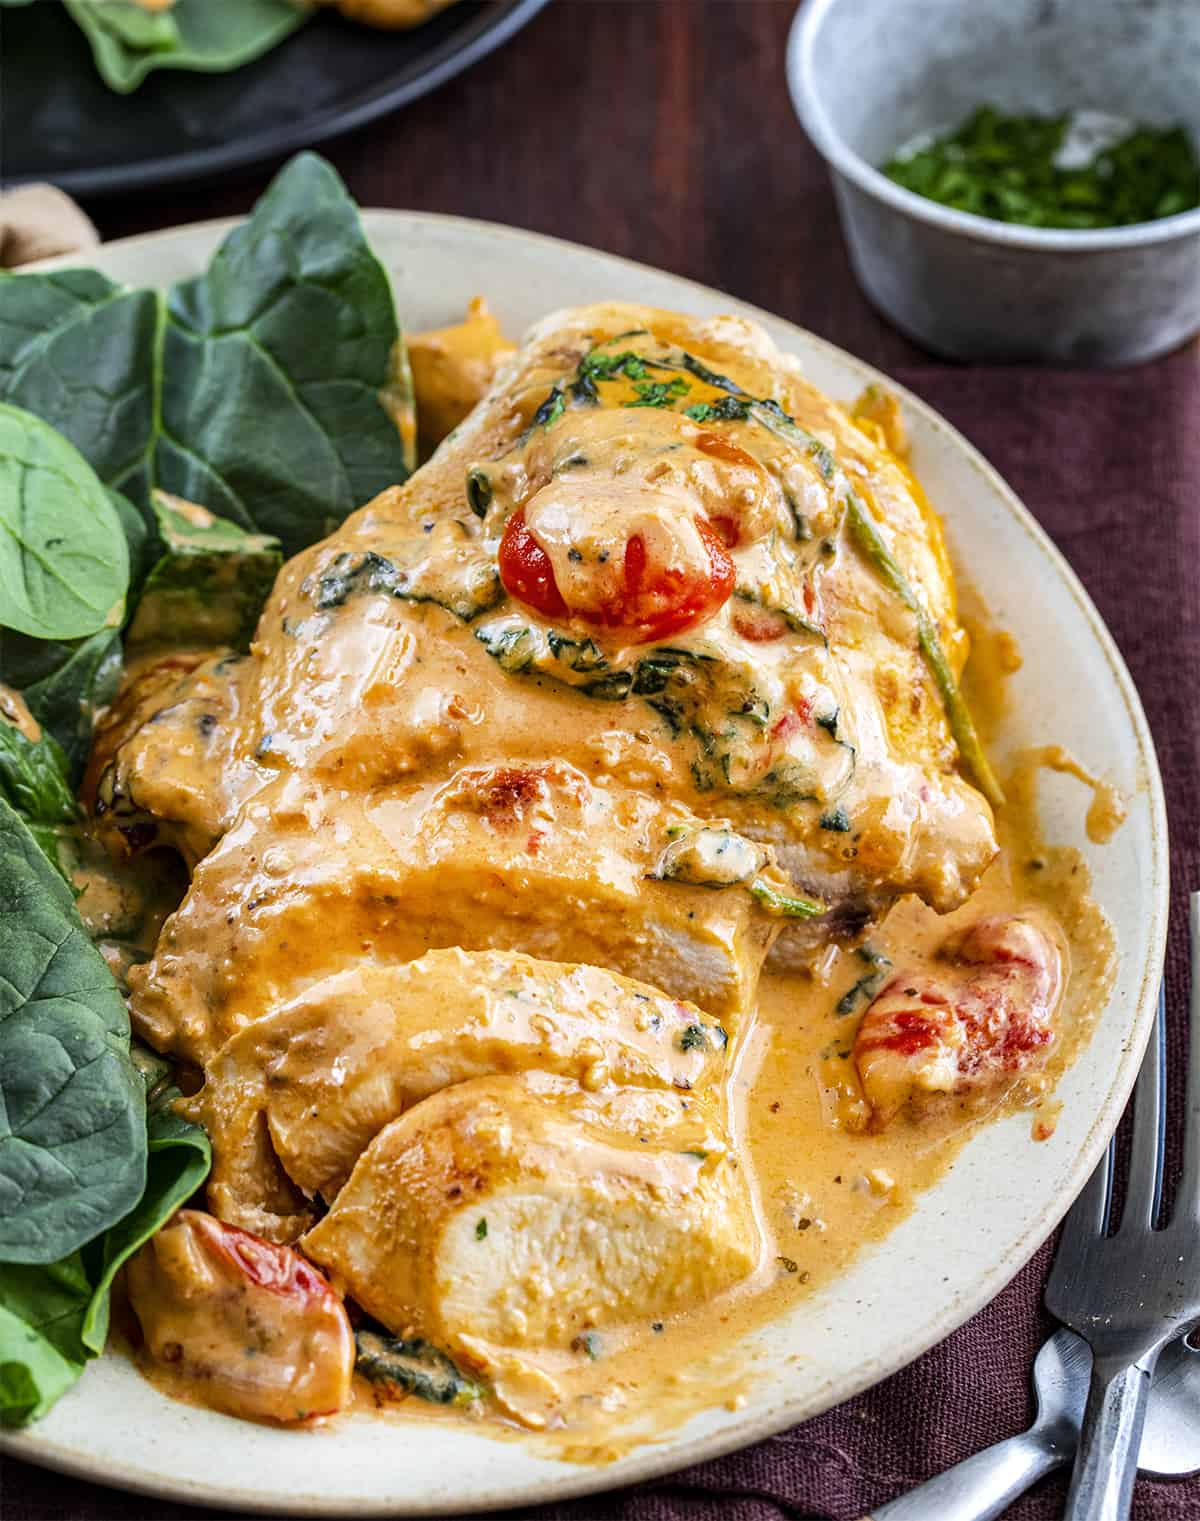 Sliced Chicken Breast Covered in Tuscan Sauce. Dinner, Supper, Chicken Recipes, What to Cook for Dinner, Easy Chicken Recipe, How to Make Tuscan Chicken, What is Tuscan, Creamy Tomato Sauce Chicken, Kid Favorites Dinner, i am homesteader, iamhomesteader